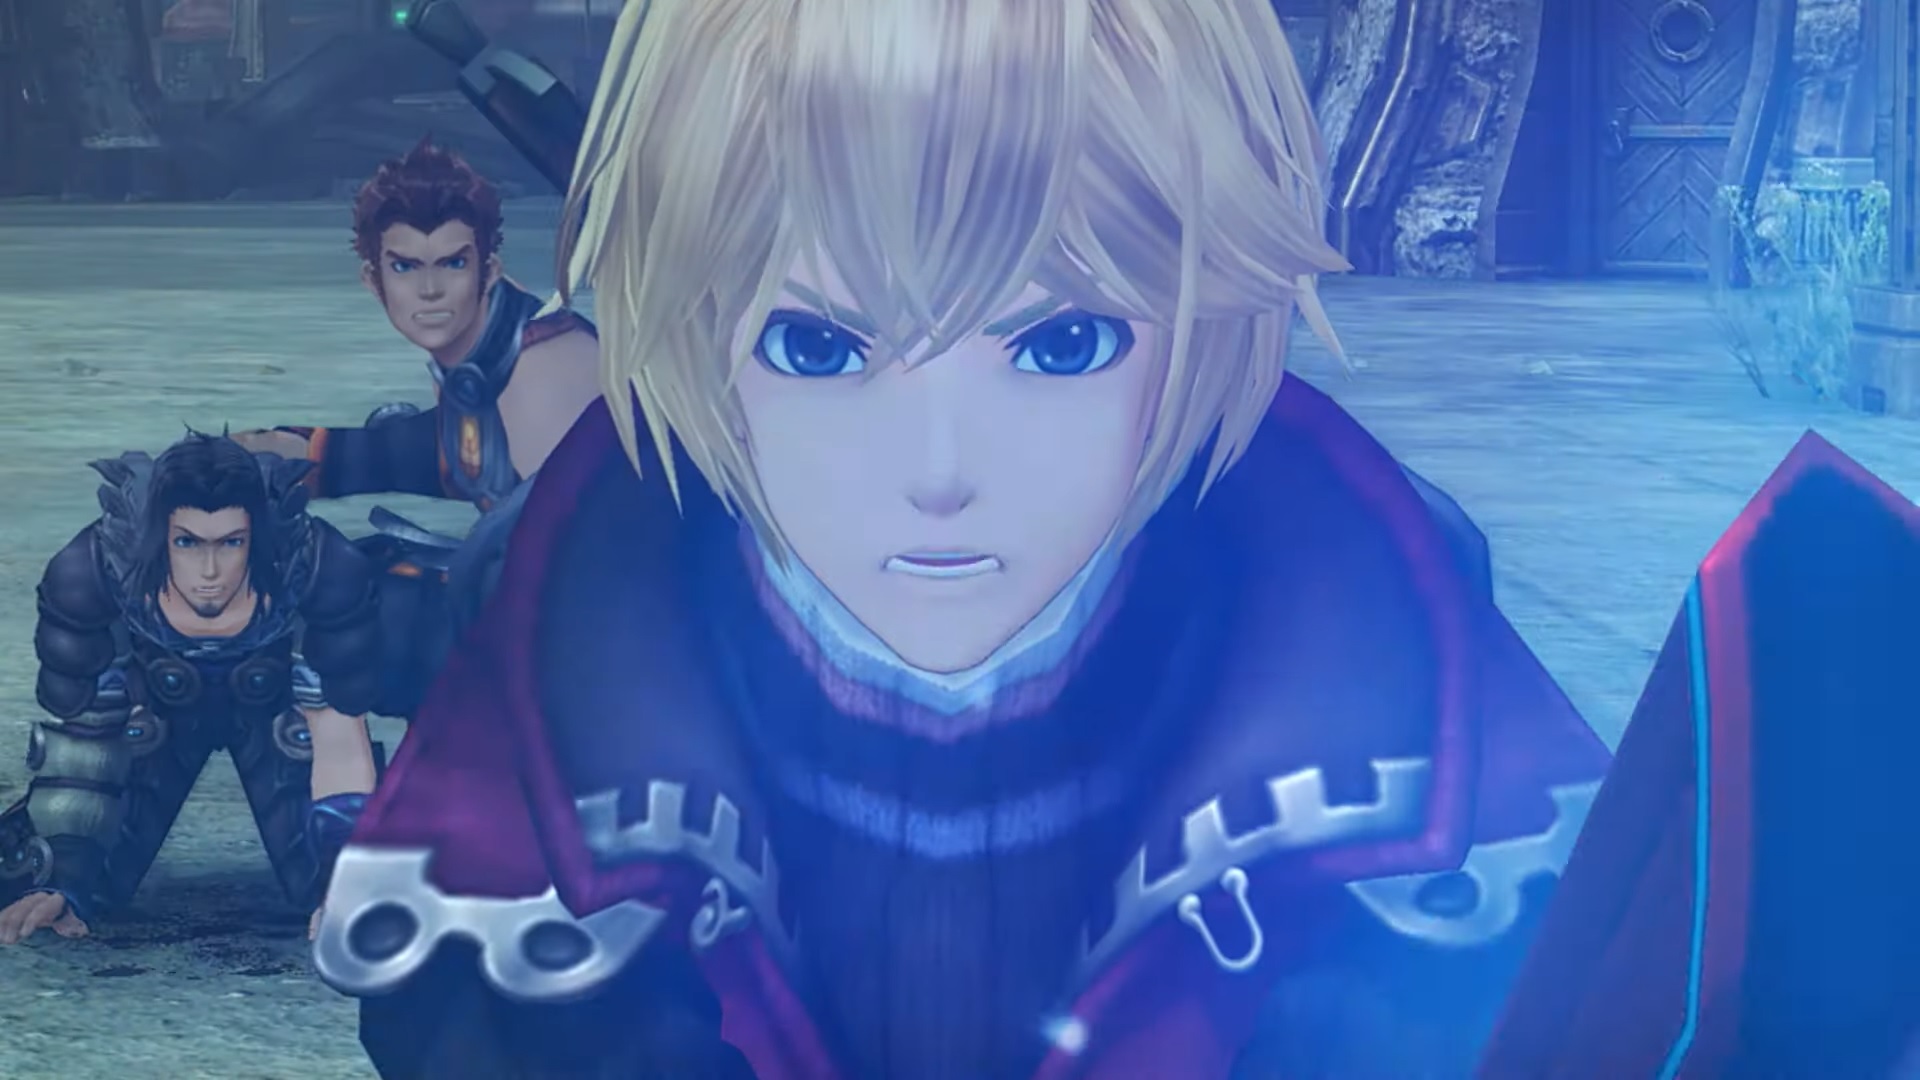 Xenoblade Chronicles Definitive Edition Release Date Is May 29, 2020